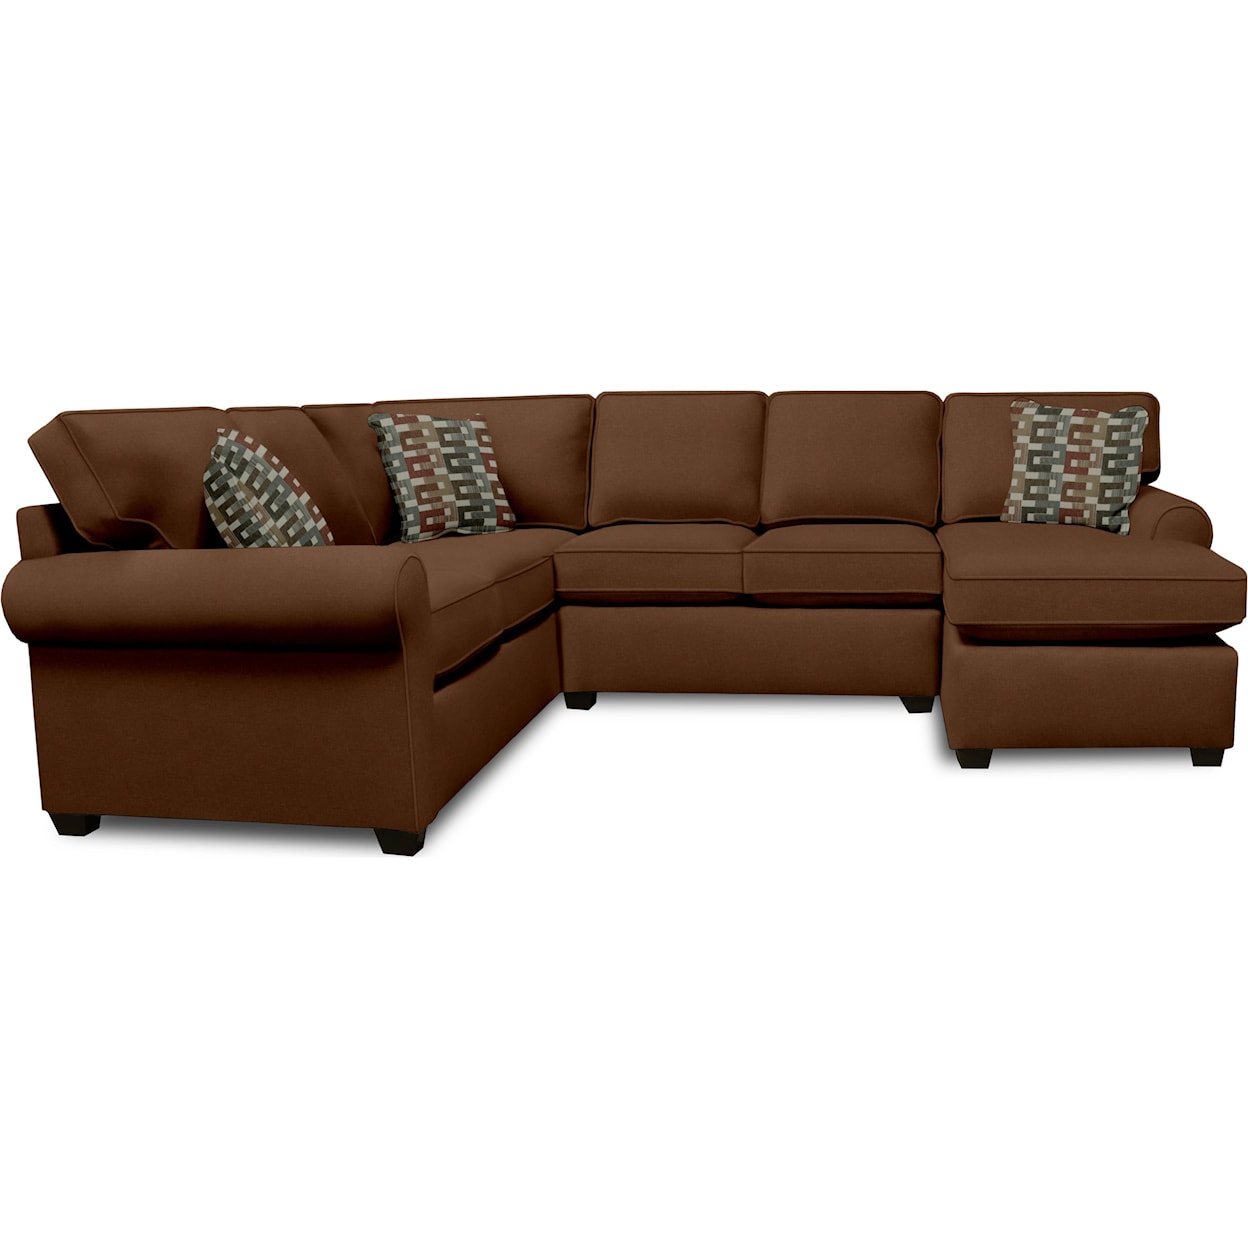 Dimensions 2630 Series Sectional